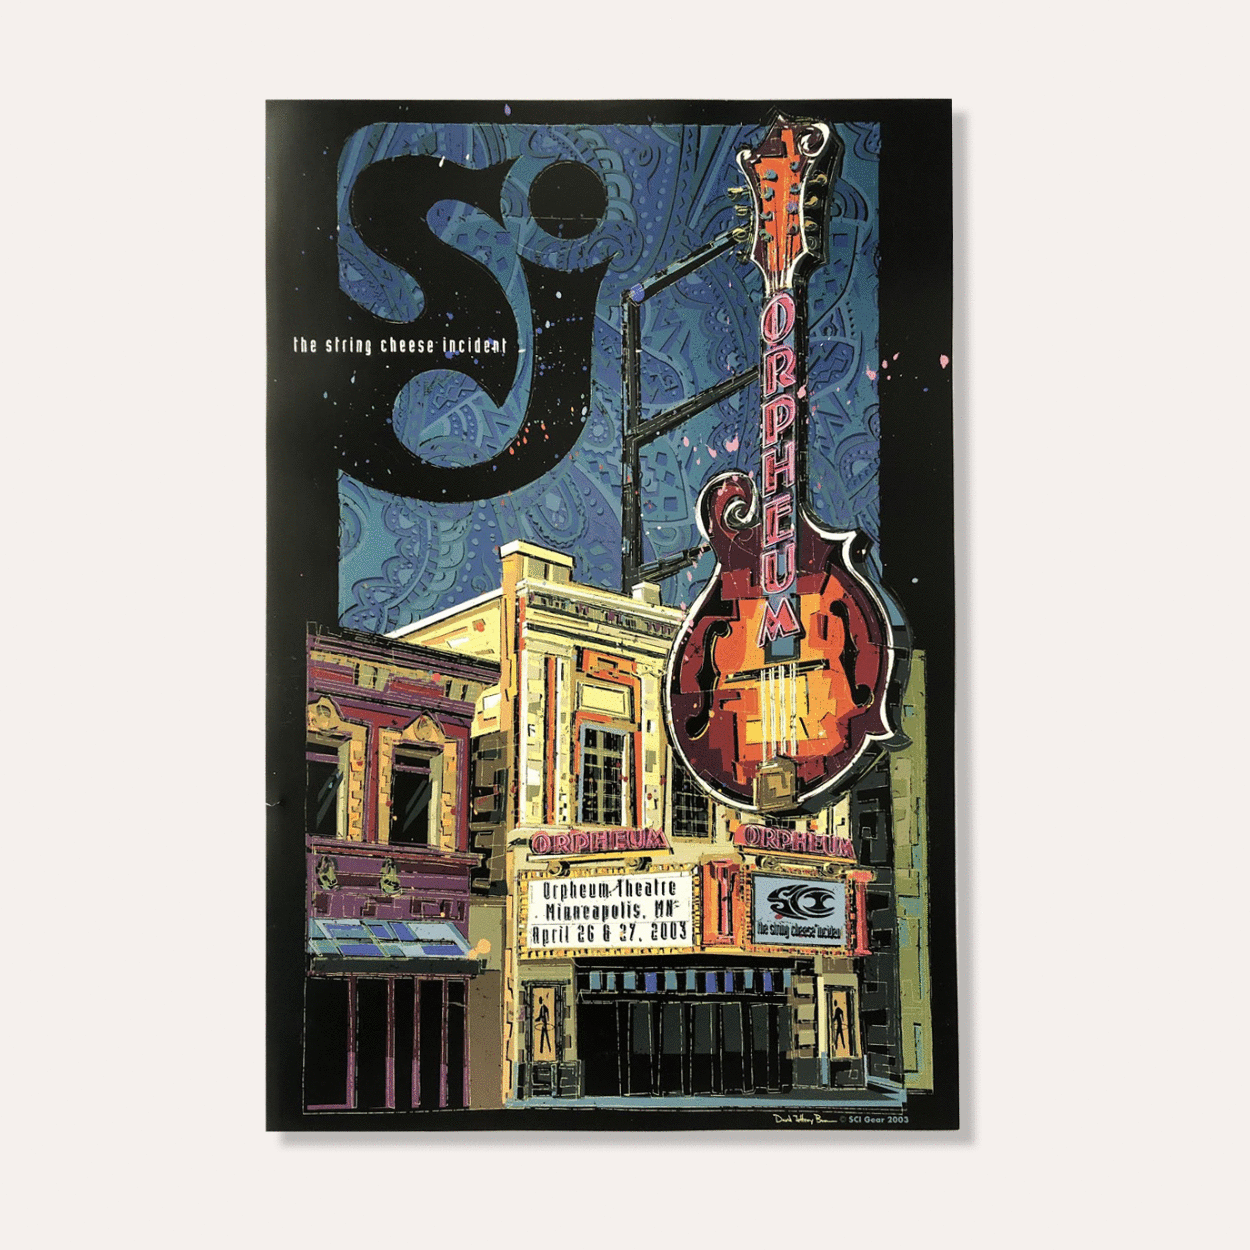 The String Cheese Incident - Merch - Posters - 2003 Orpheum Theater Minneapolis